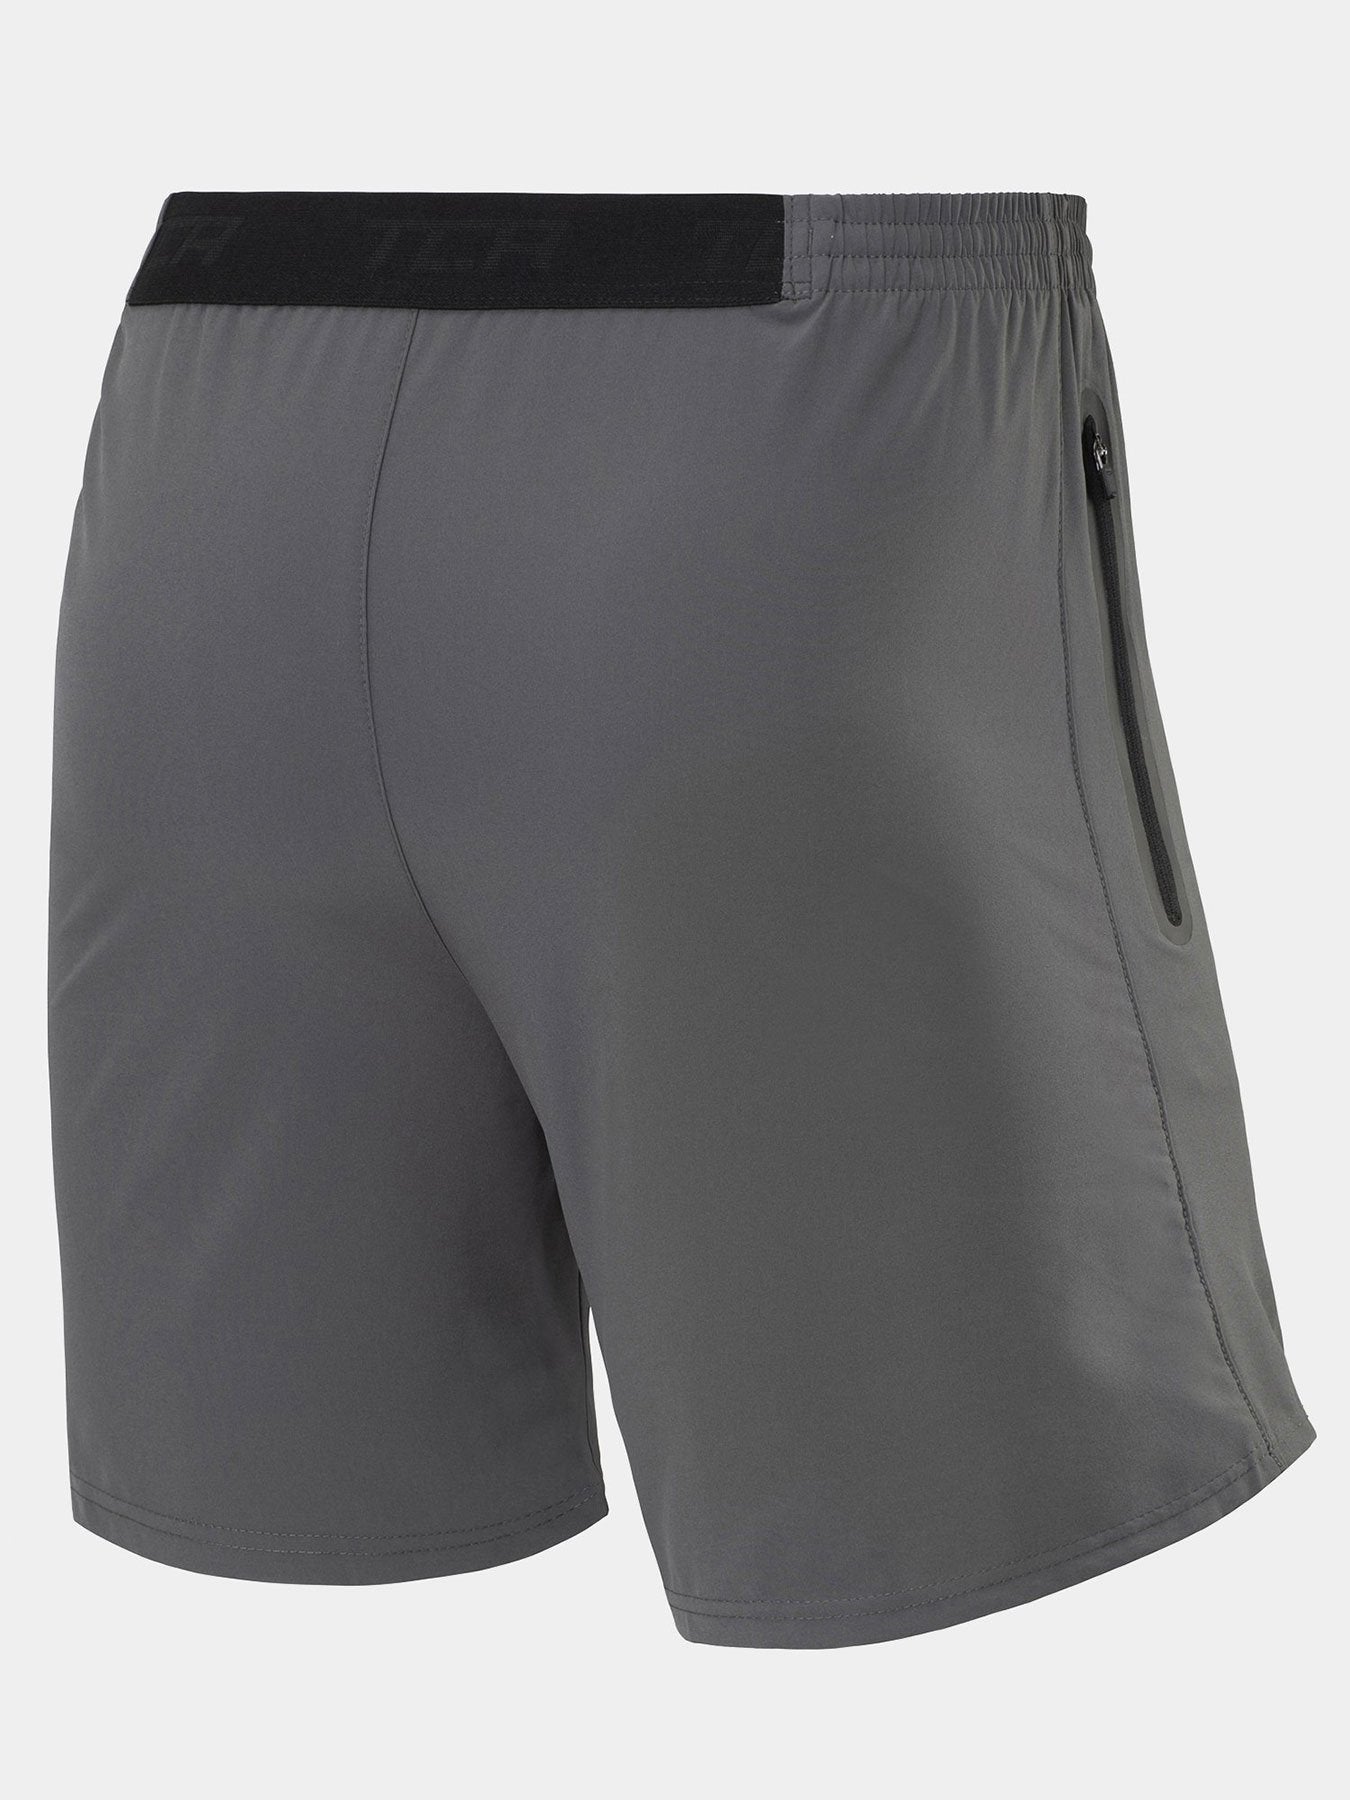 Mens Running Shorts With Pocket, Compression, And Phone Pocket 14 Length,  Athletic Layer For Gym And Outdoor Activities From Sports_goods88, $15.55